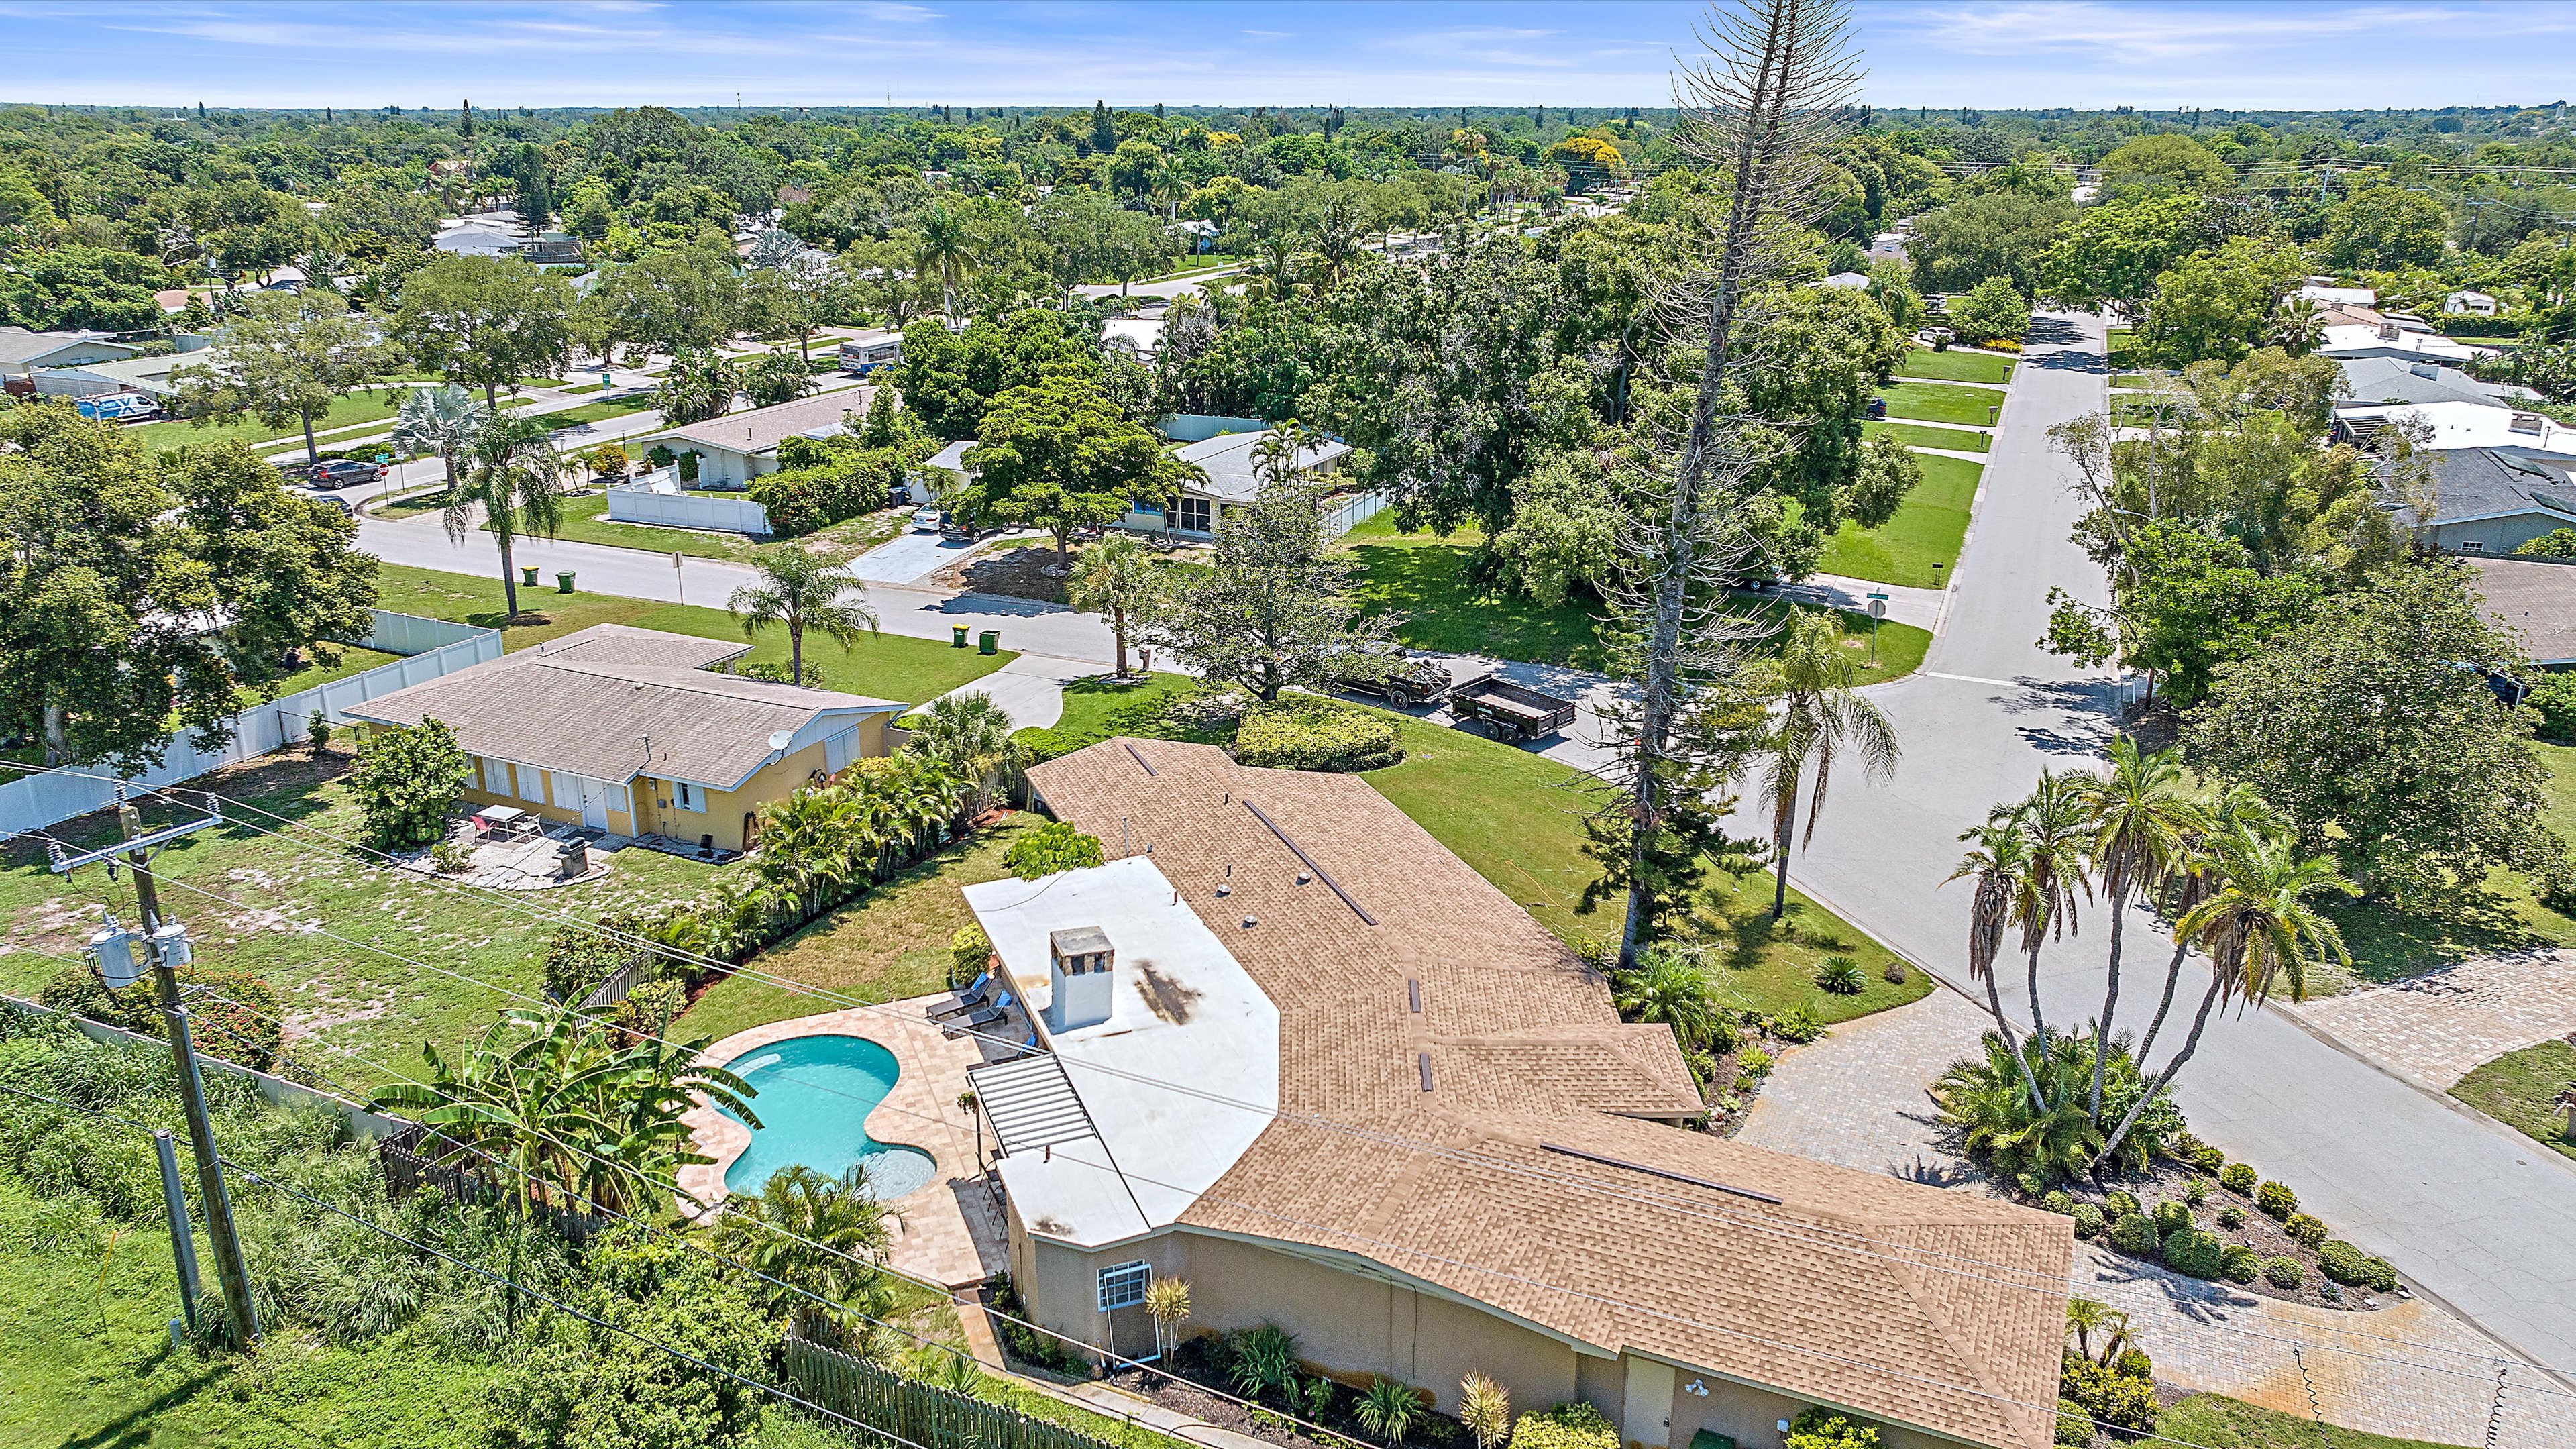 Aerial view of the home, pool and surrounding homes.